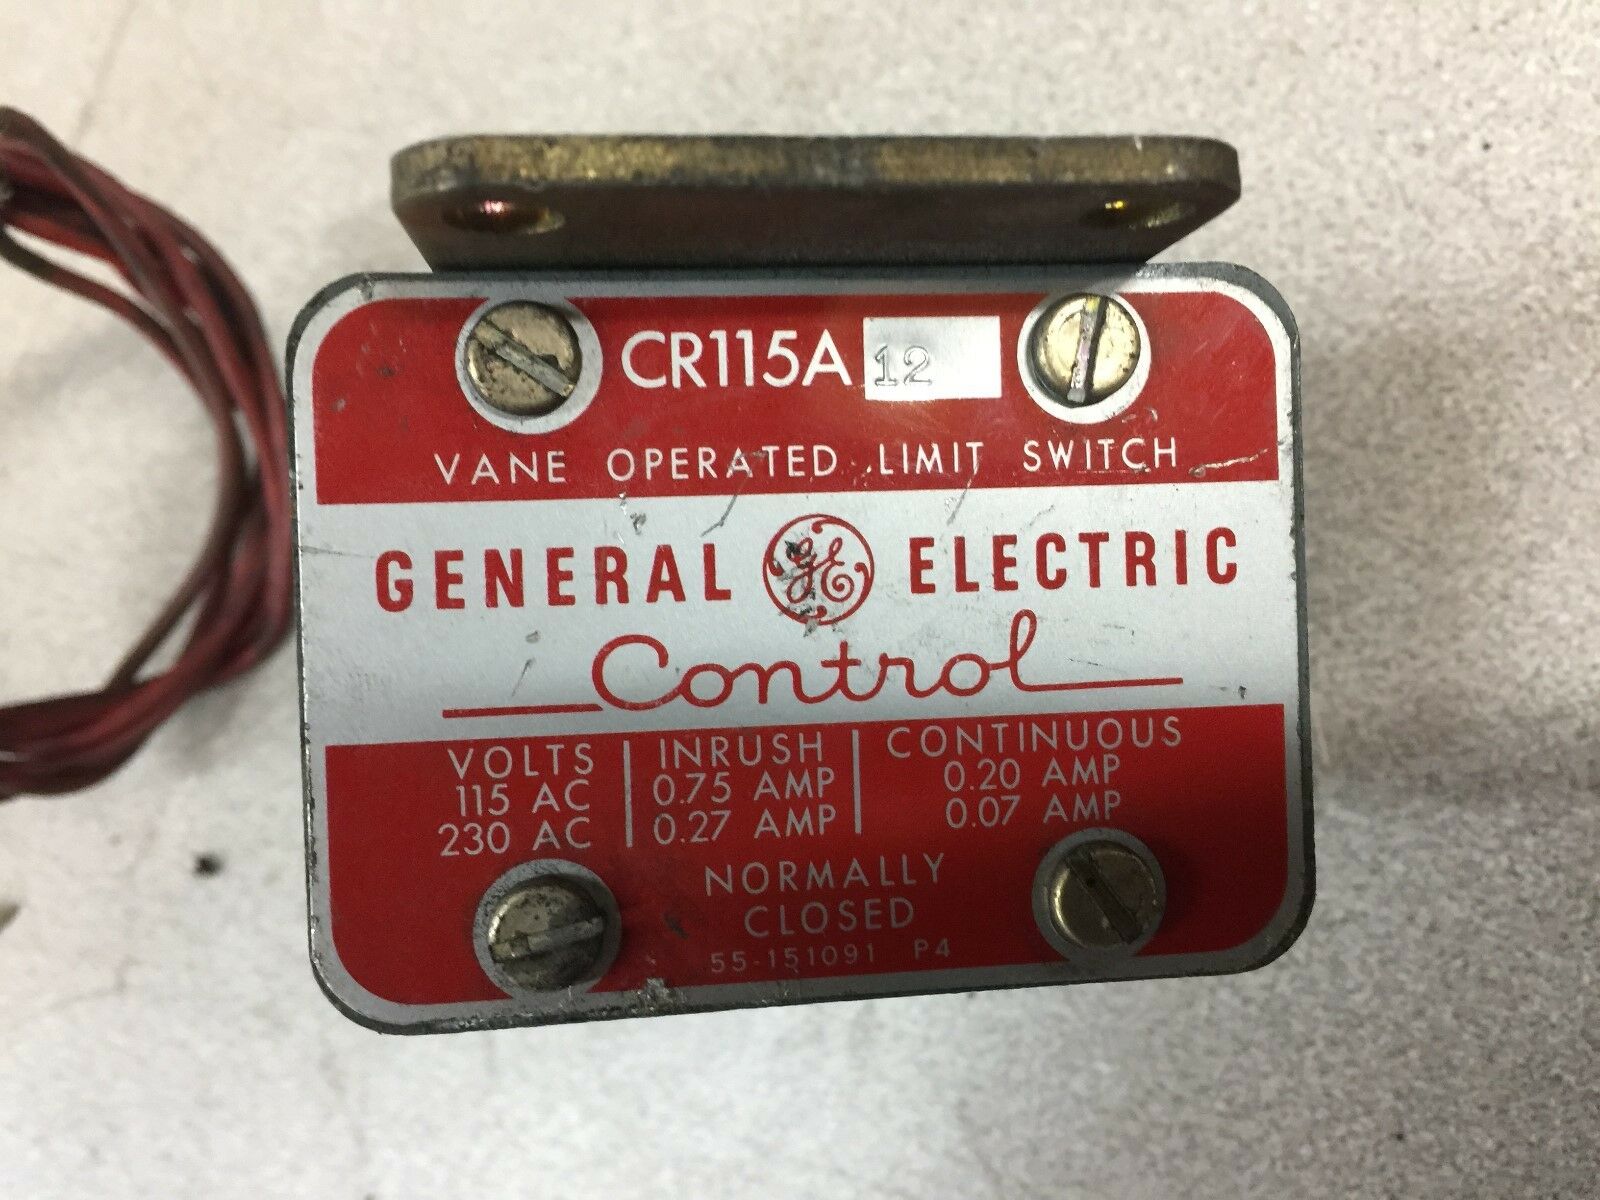 USED GE VANE OPERATED LIMIT SWITCH CR115A12